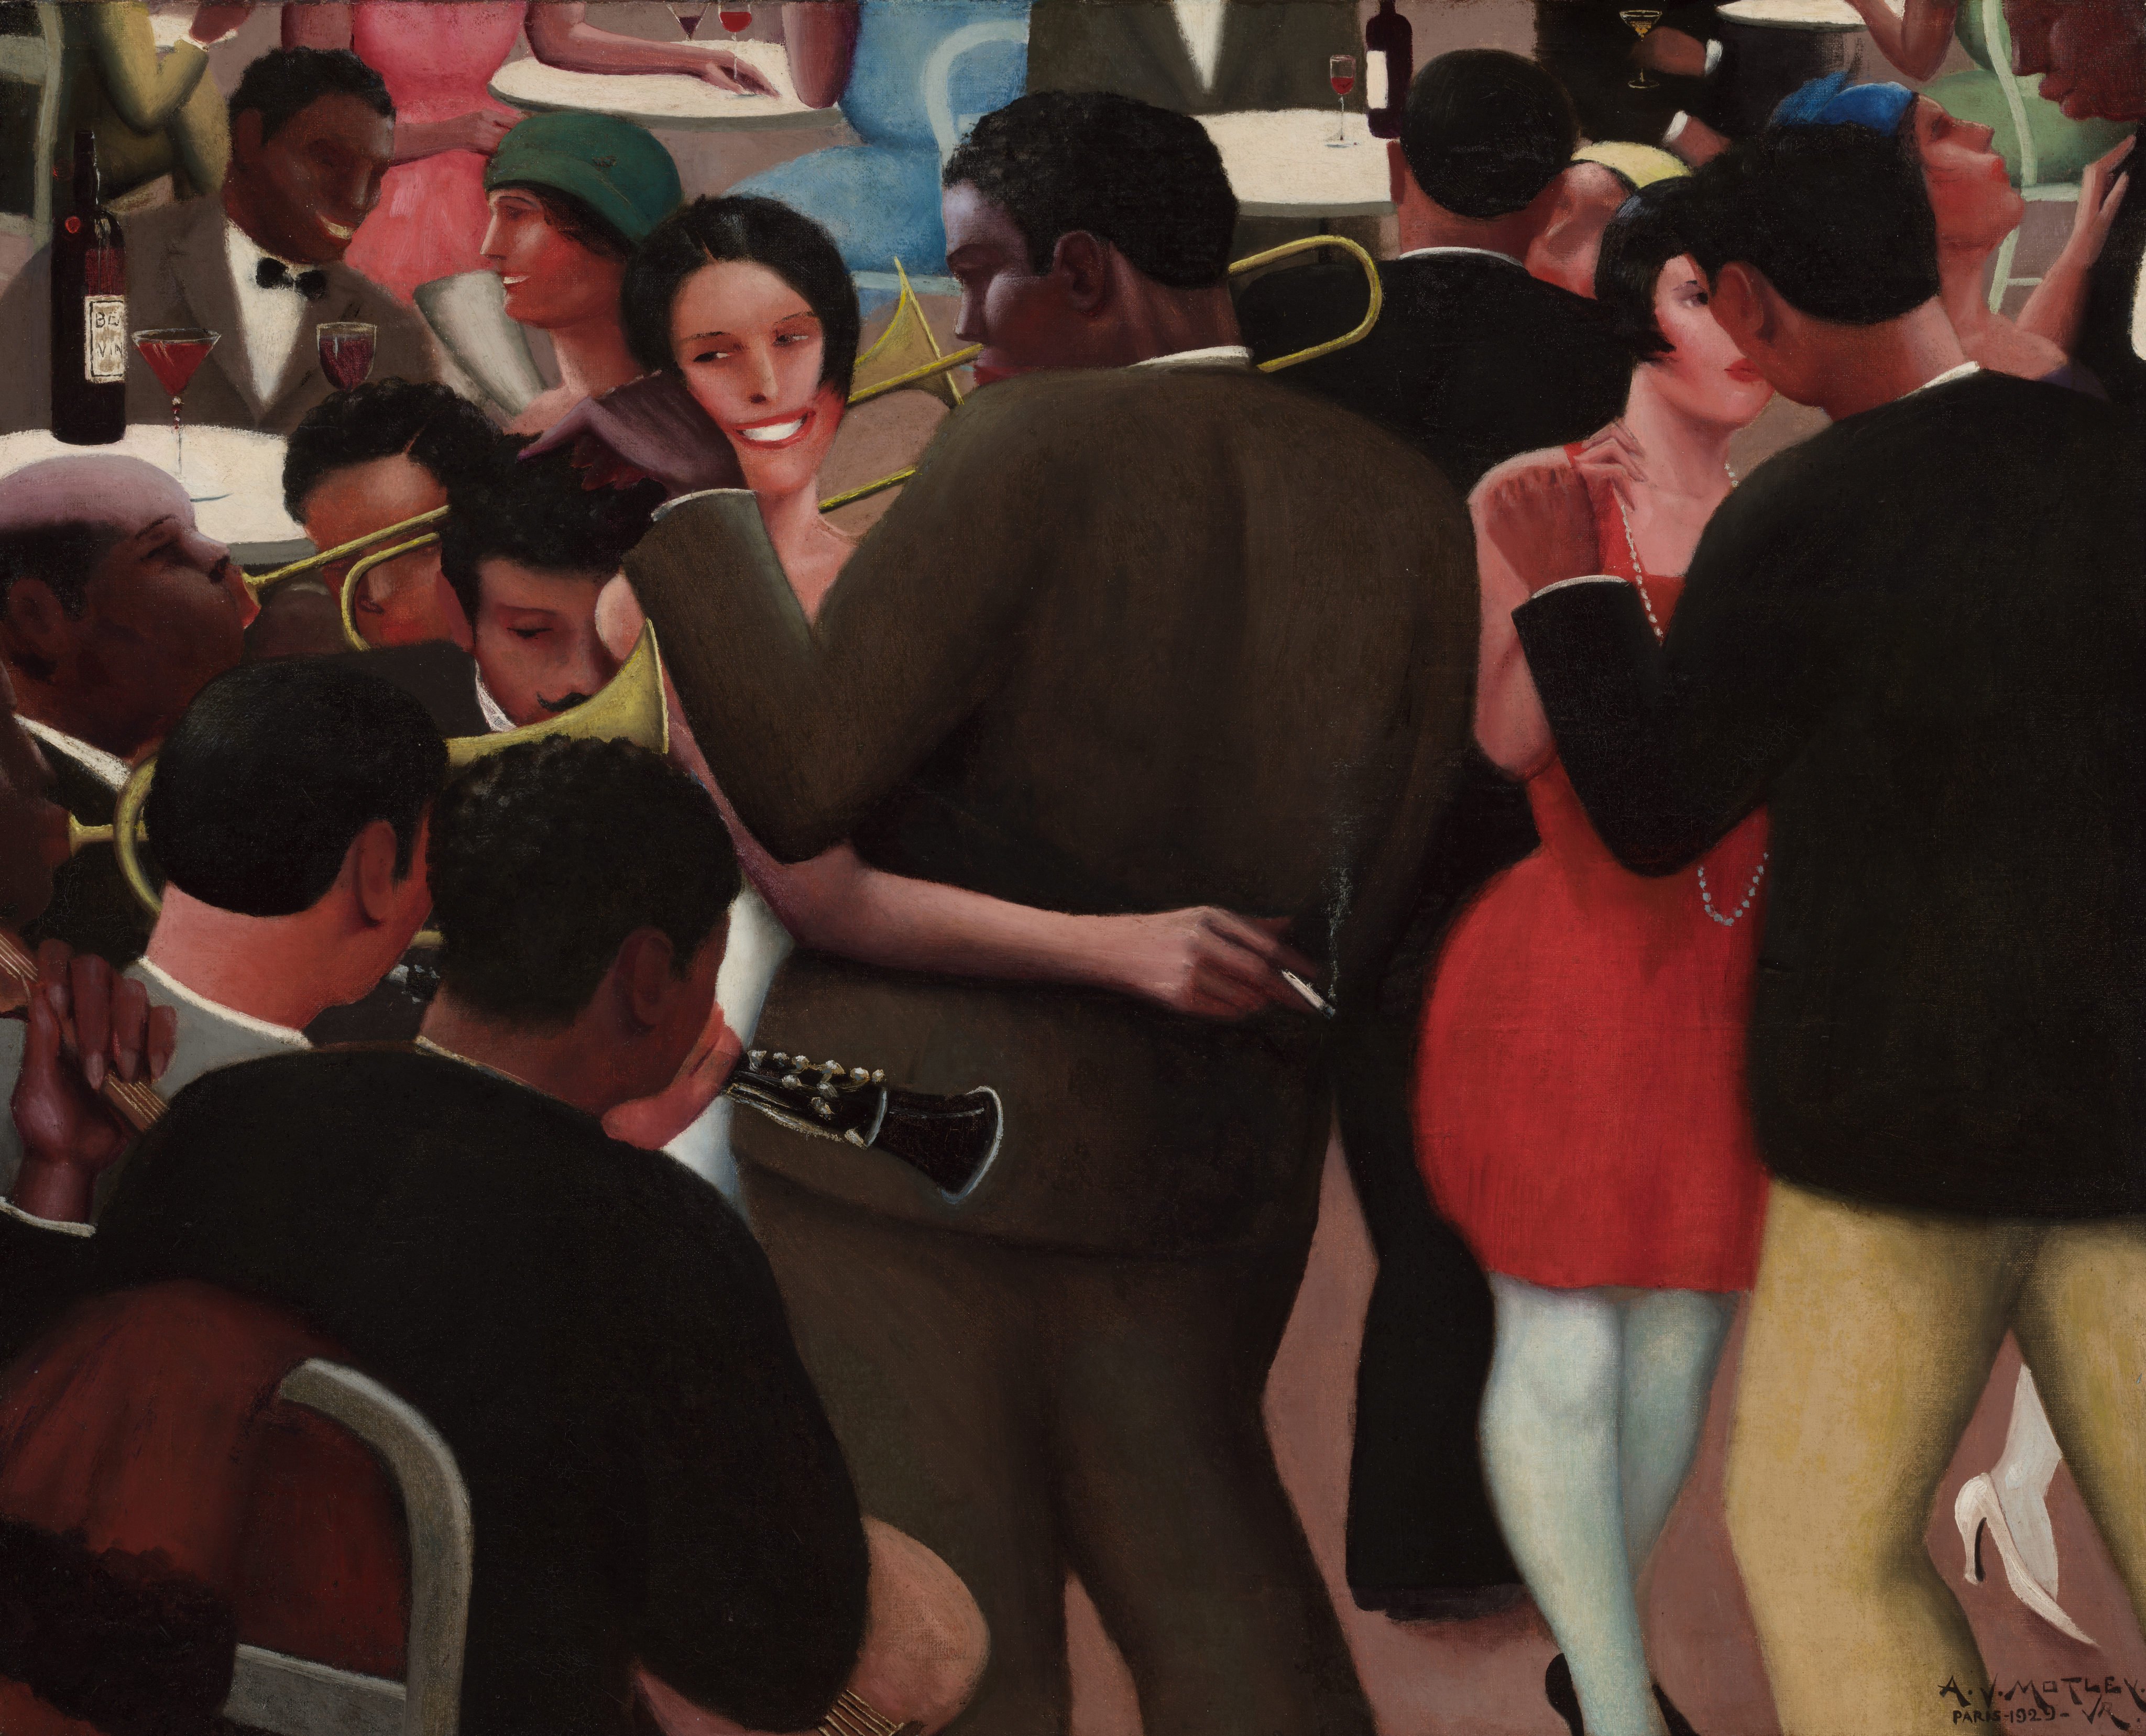 The New York Met’s Harlem Renaissance exhibition features 160 artworks by black artists showing the realities of daily life between the 1920s and the 1940s. Above: detail from Blues (1929), Archibald J. Motley Jnr. Photo: courtesy of The Met